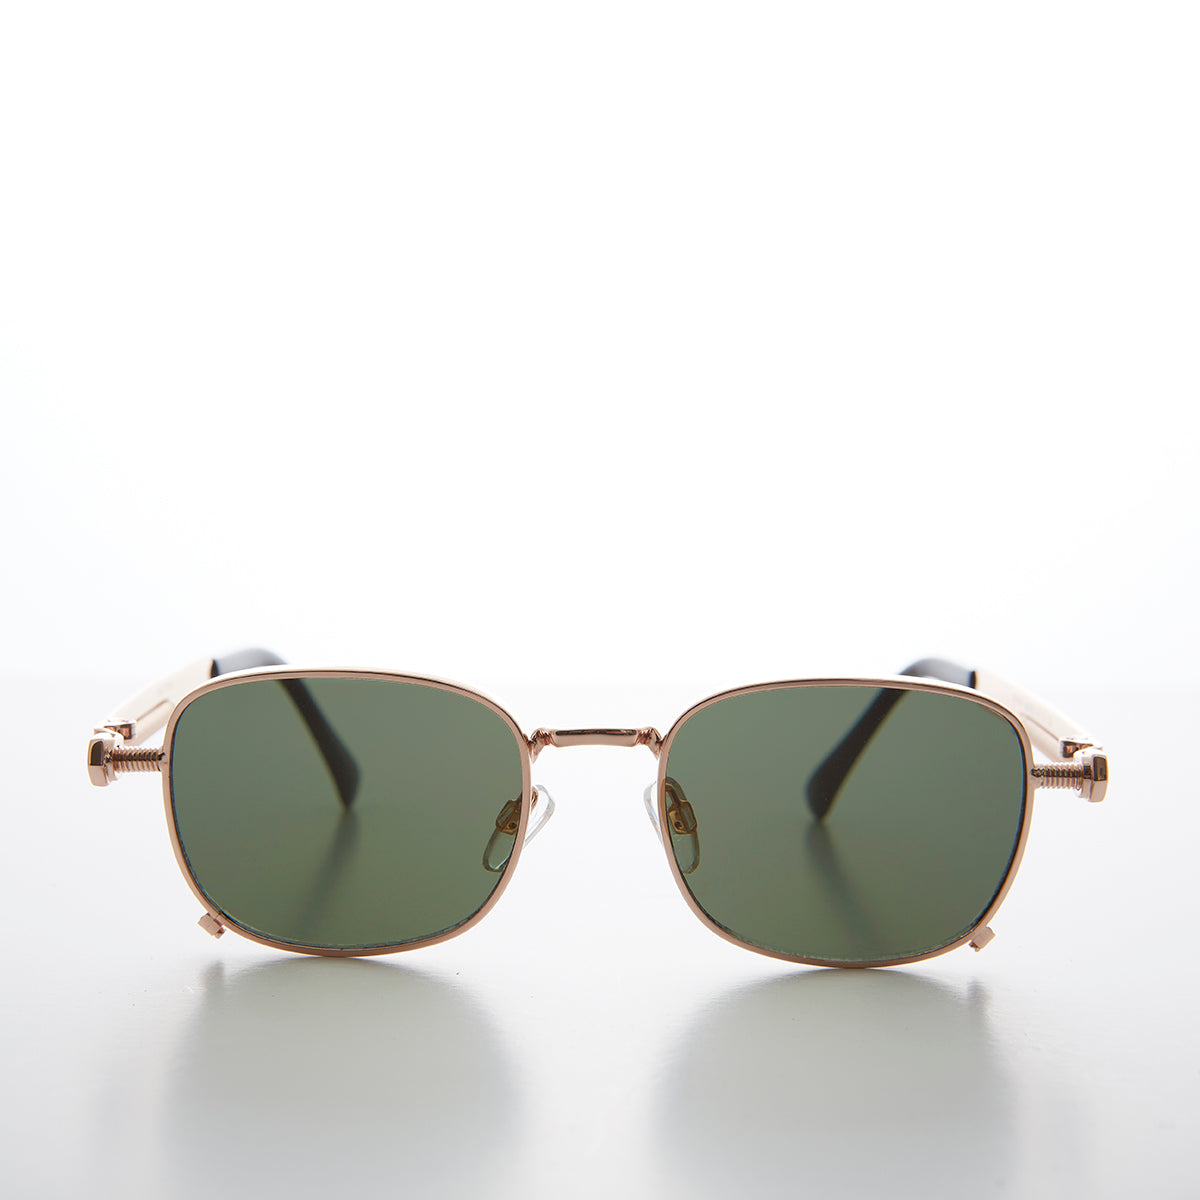 Tailored Steampunk Gold Sunglass with Industrial Temples - Tyga 1